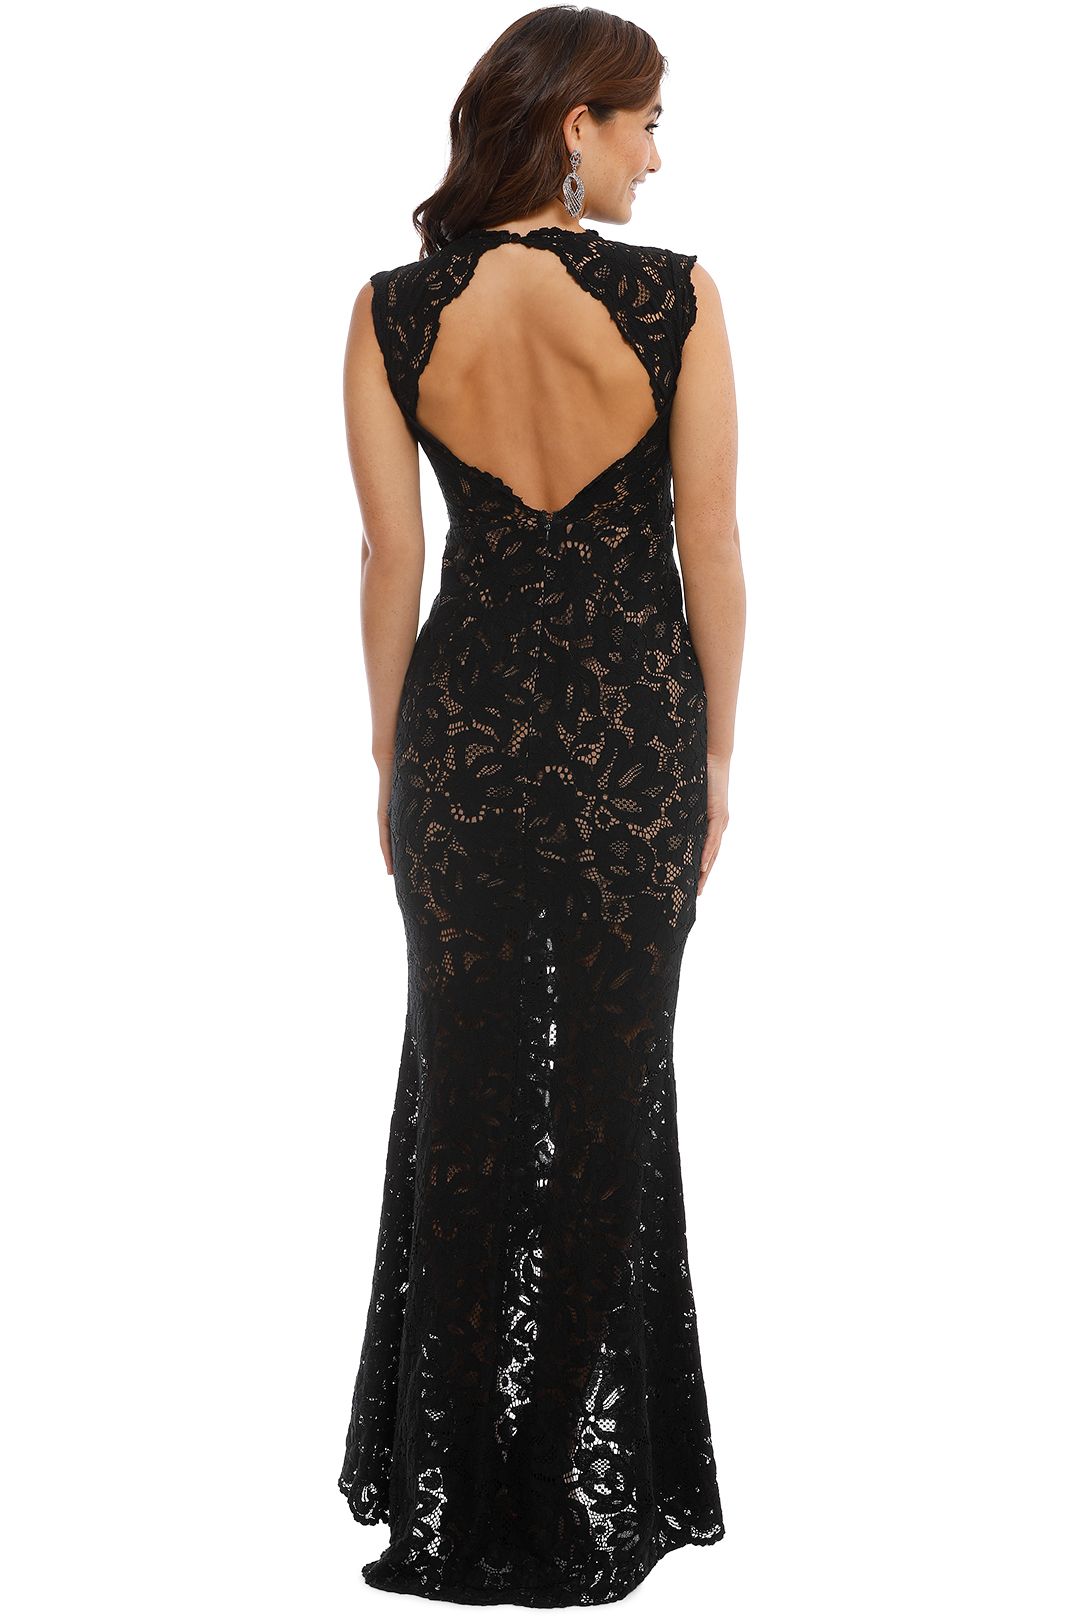 Grace and Hart - Valentine Gown - Black - Back